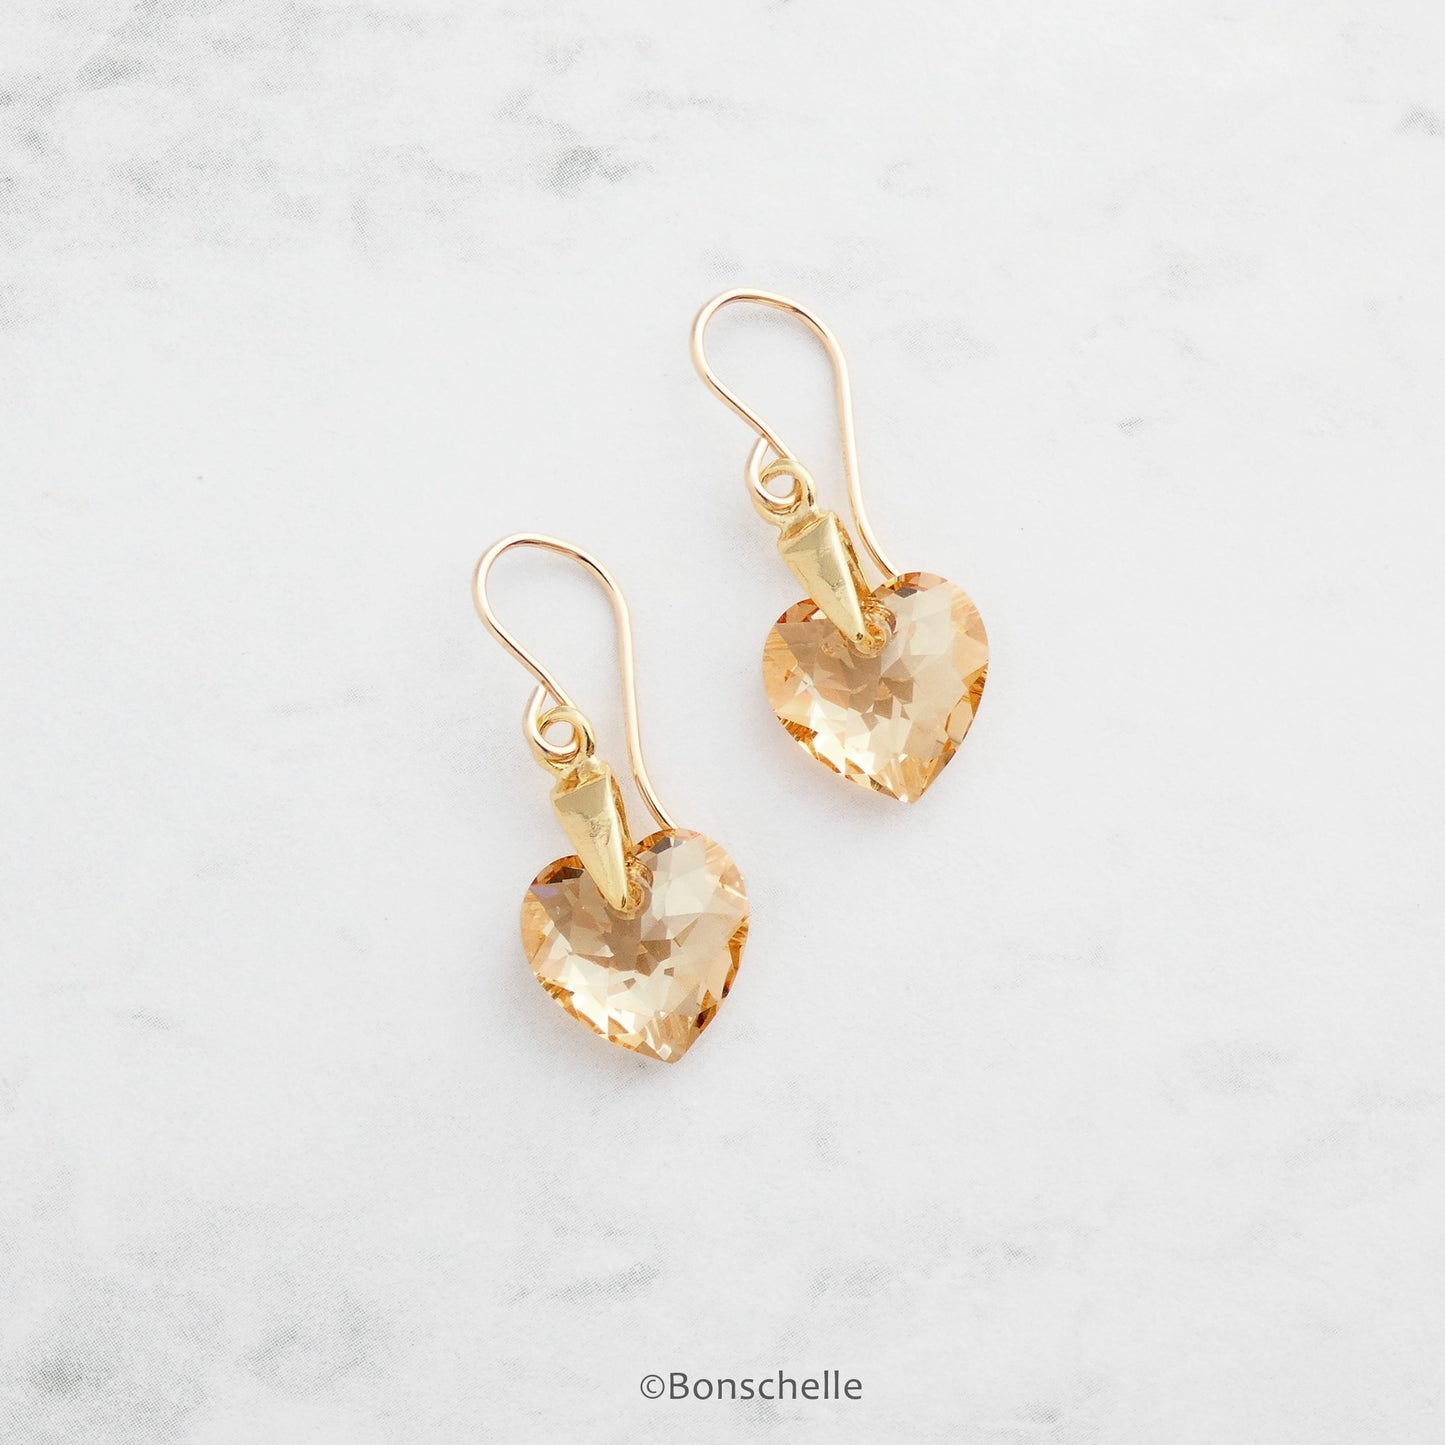 Handmade earrings with pale golden bronze toned Swarovski crystal heart earrings and 14K gold filled earwires .